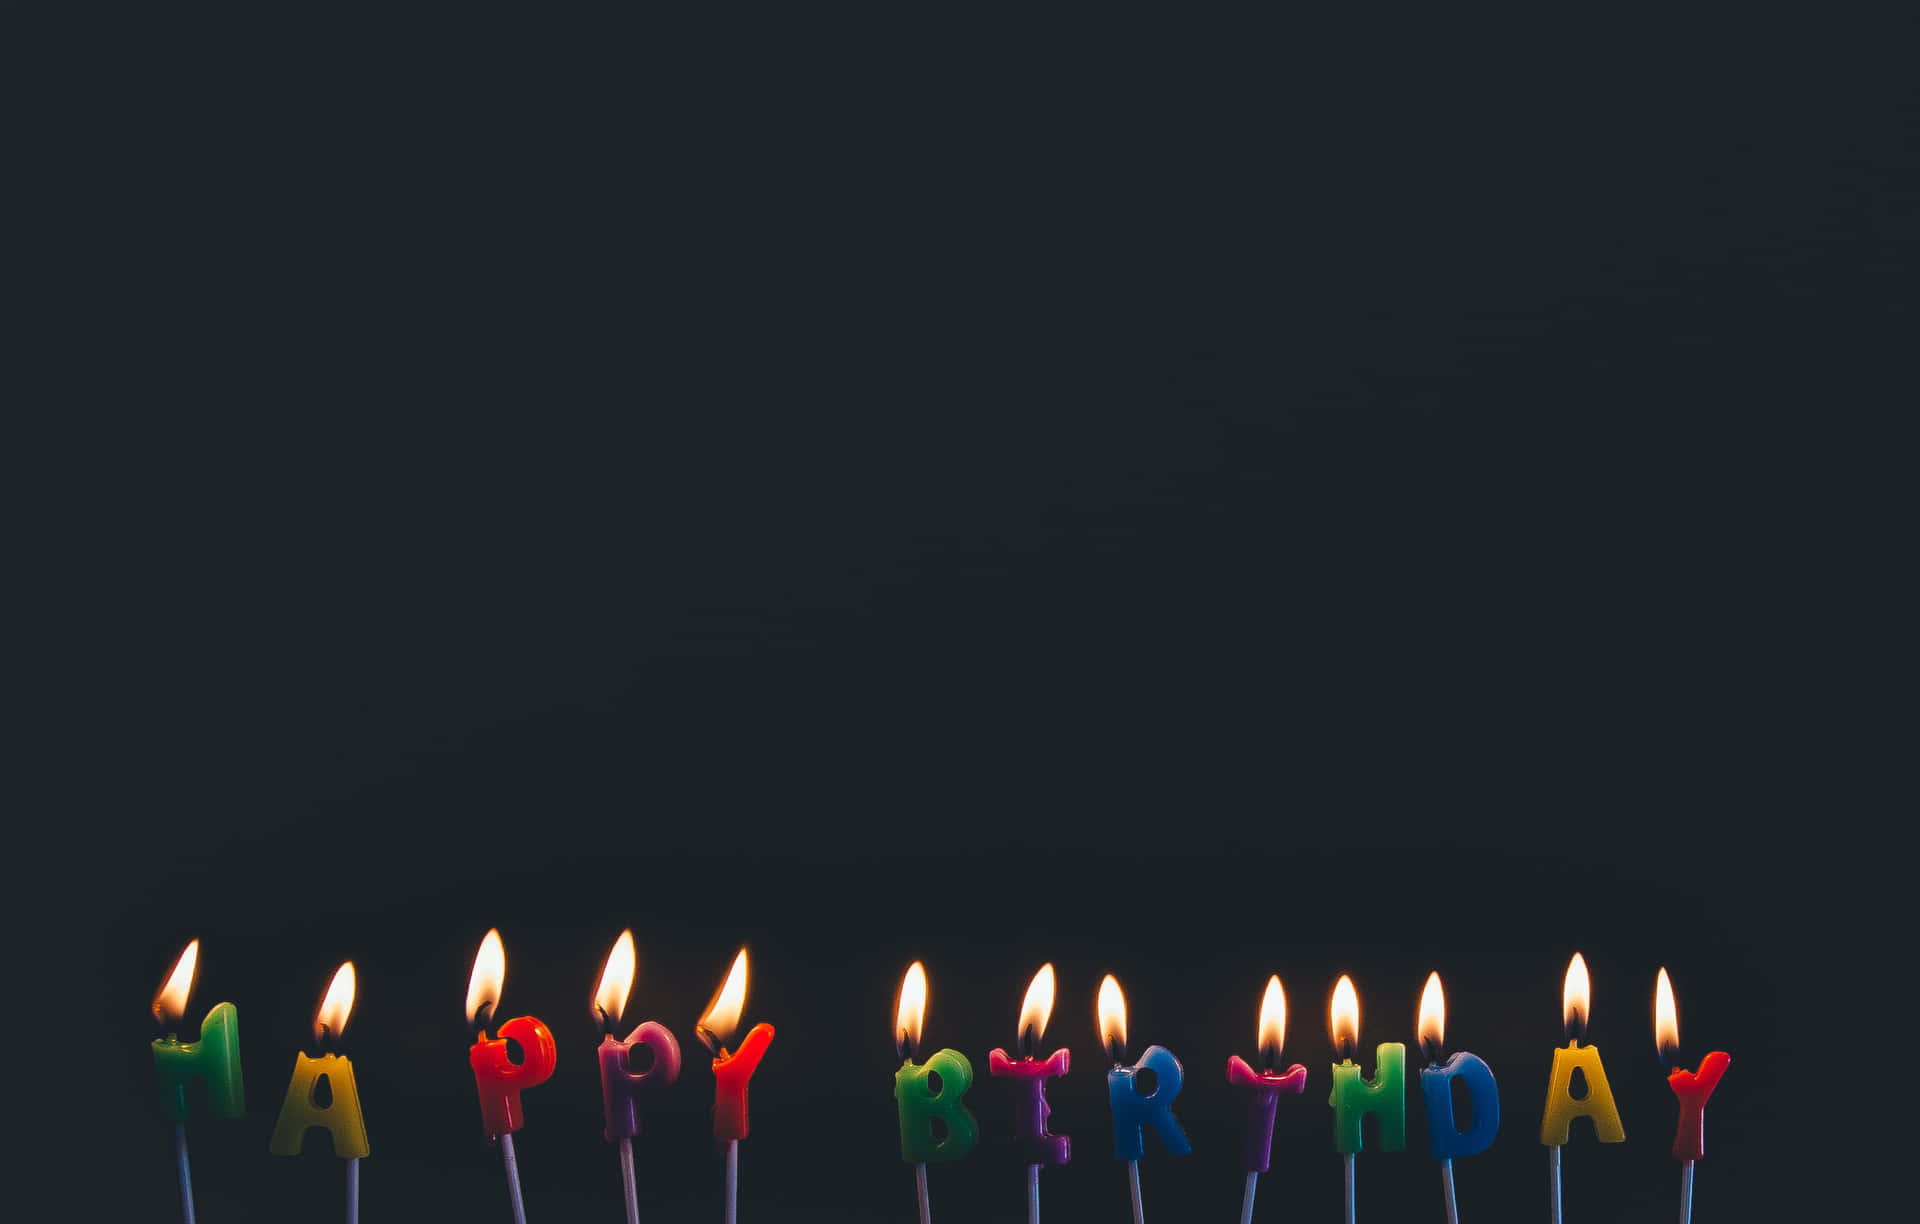 A Group Of Candles With Happy Birthday Written On Them Background